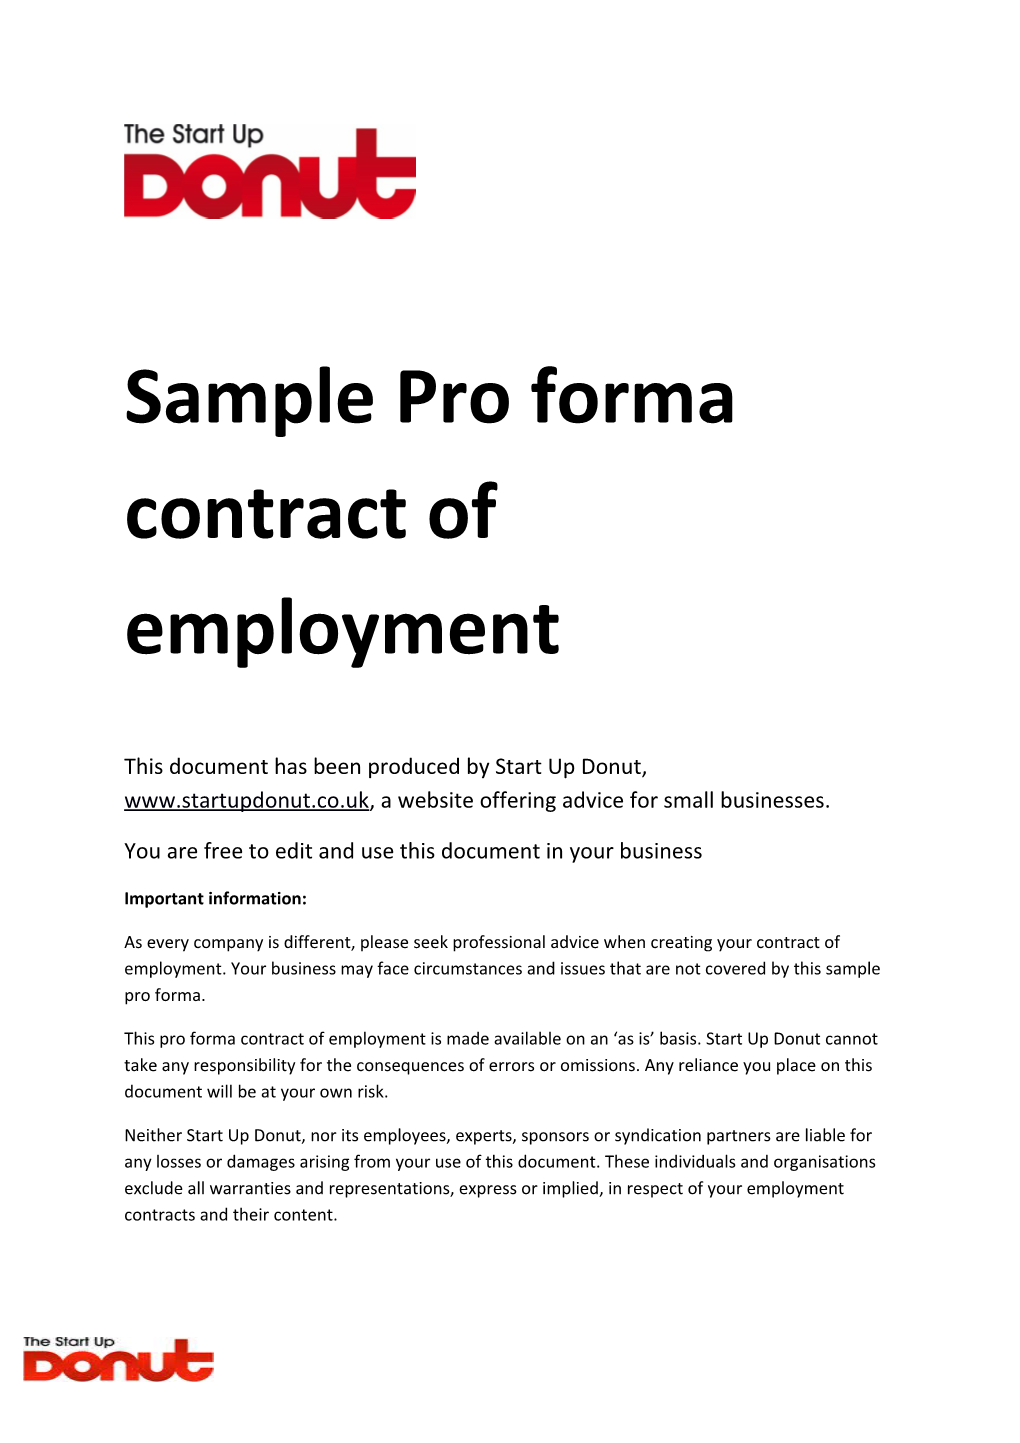 Sample Pro Forma Contract of Employment